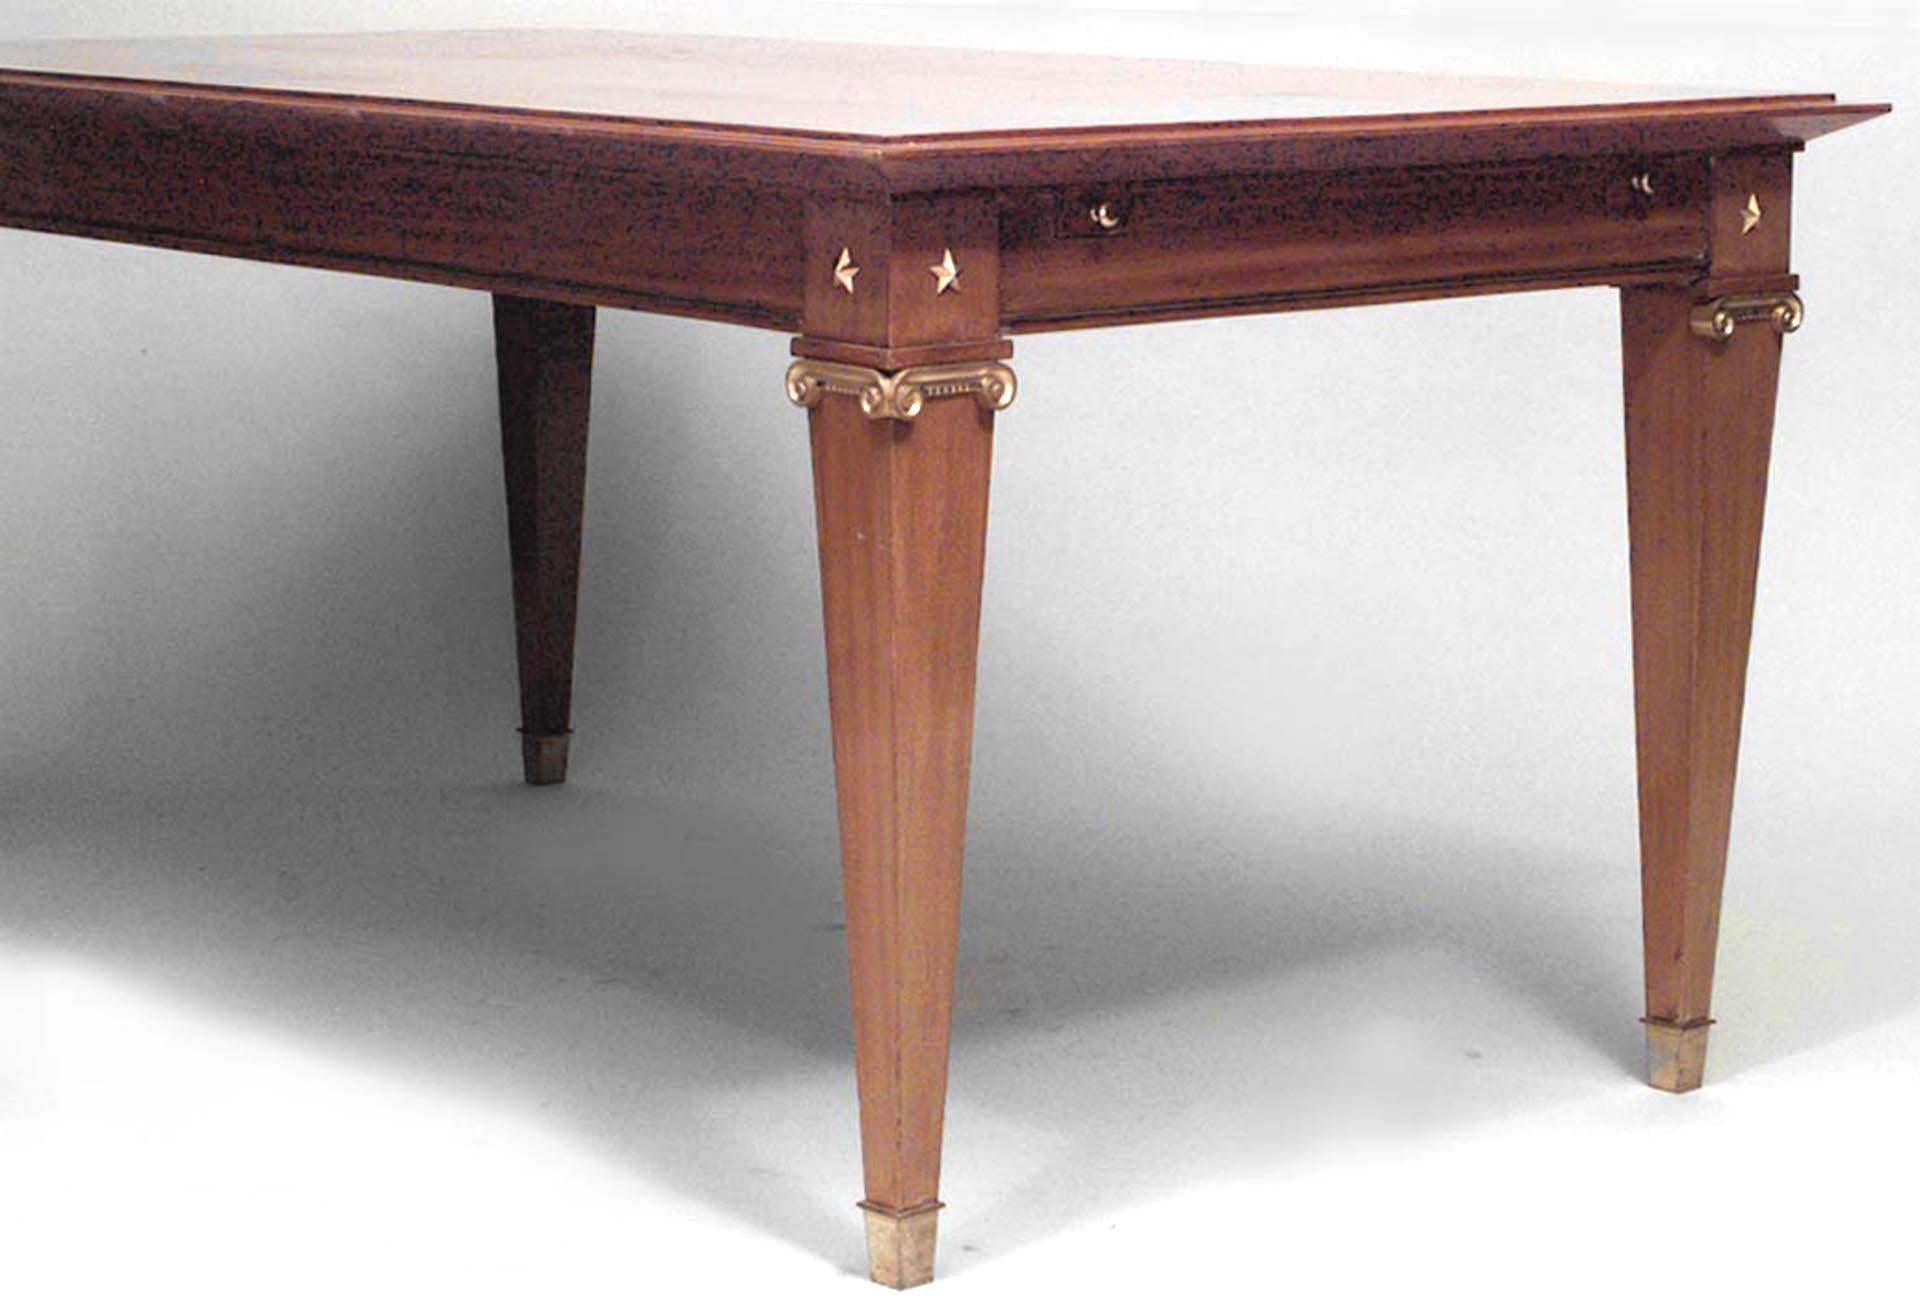 French Mid-Century (1940s) mahogany and brass trimmed extension dining table (2 leaves - 18 inches each) (by JACQUES LARDIN; ROUSSEAU ET LARDIN)
